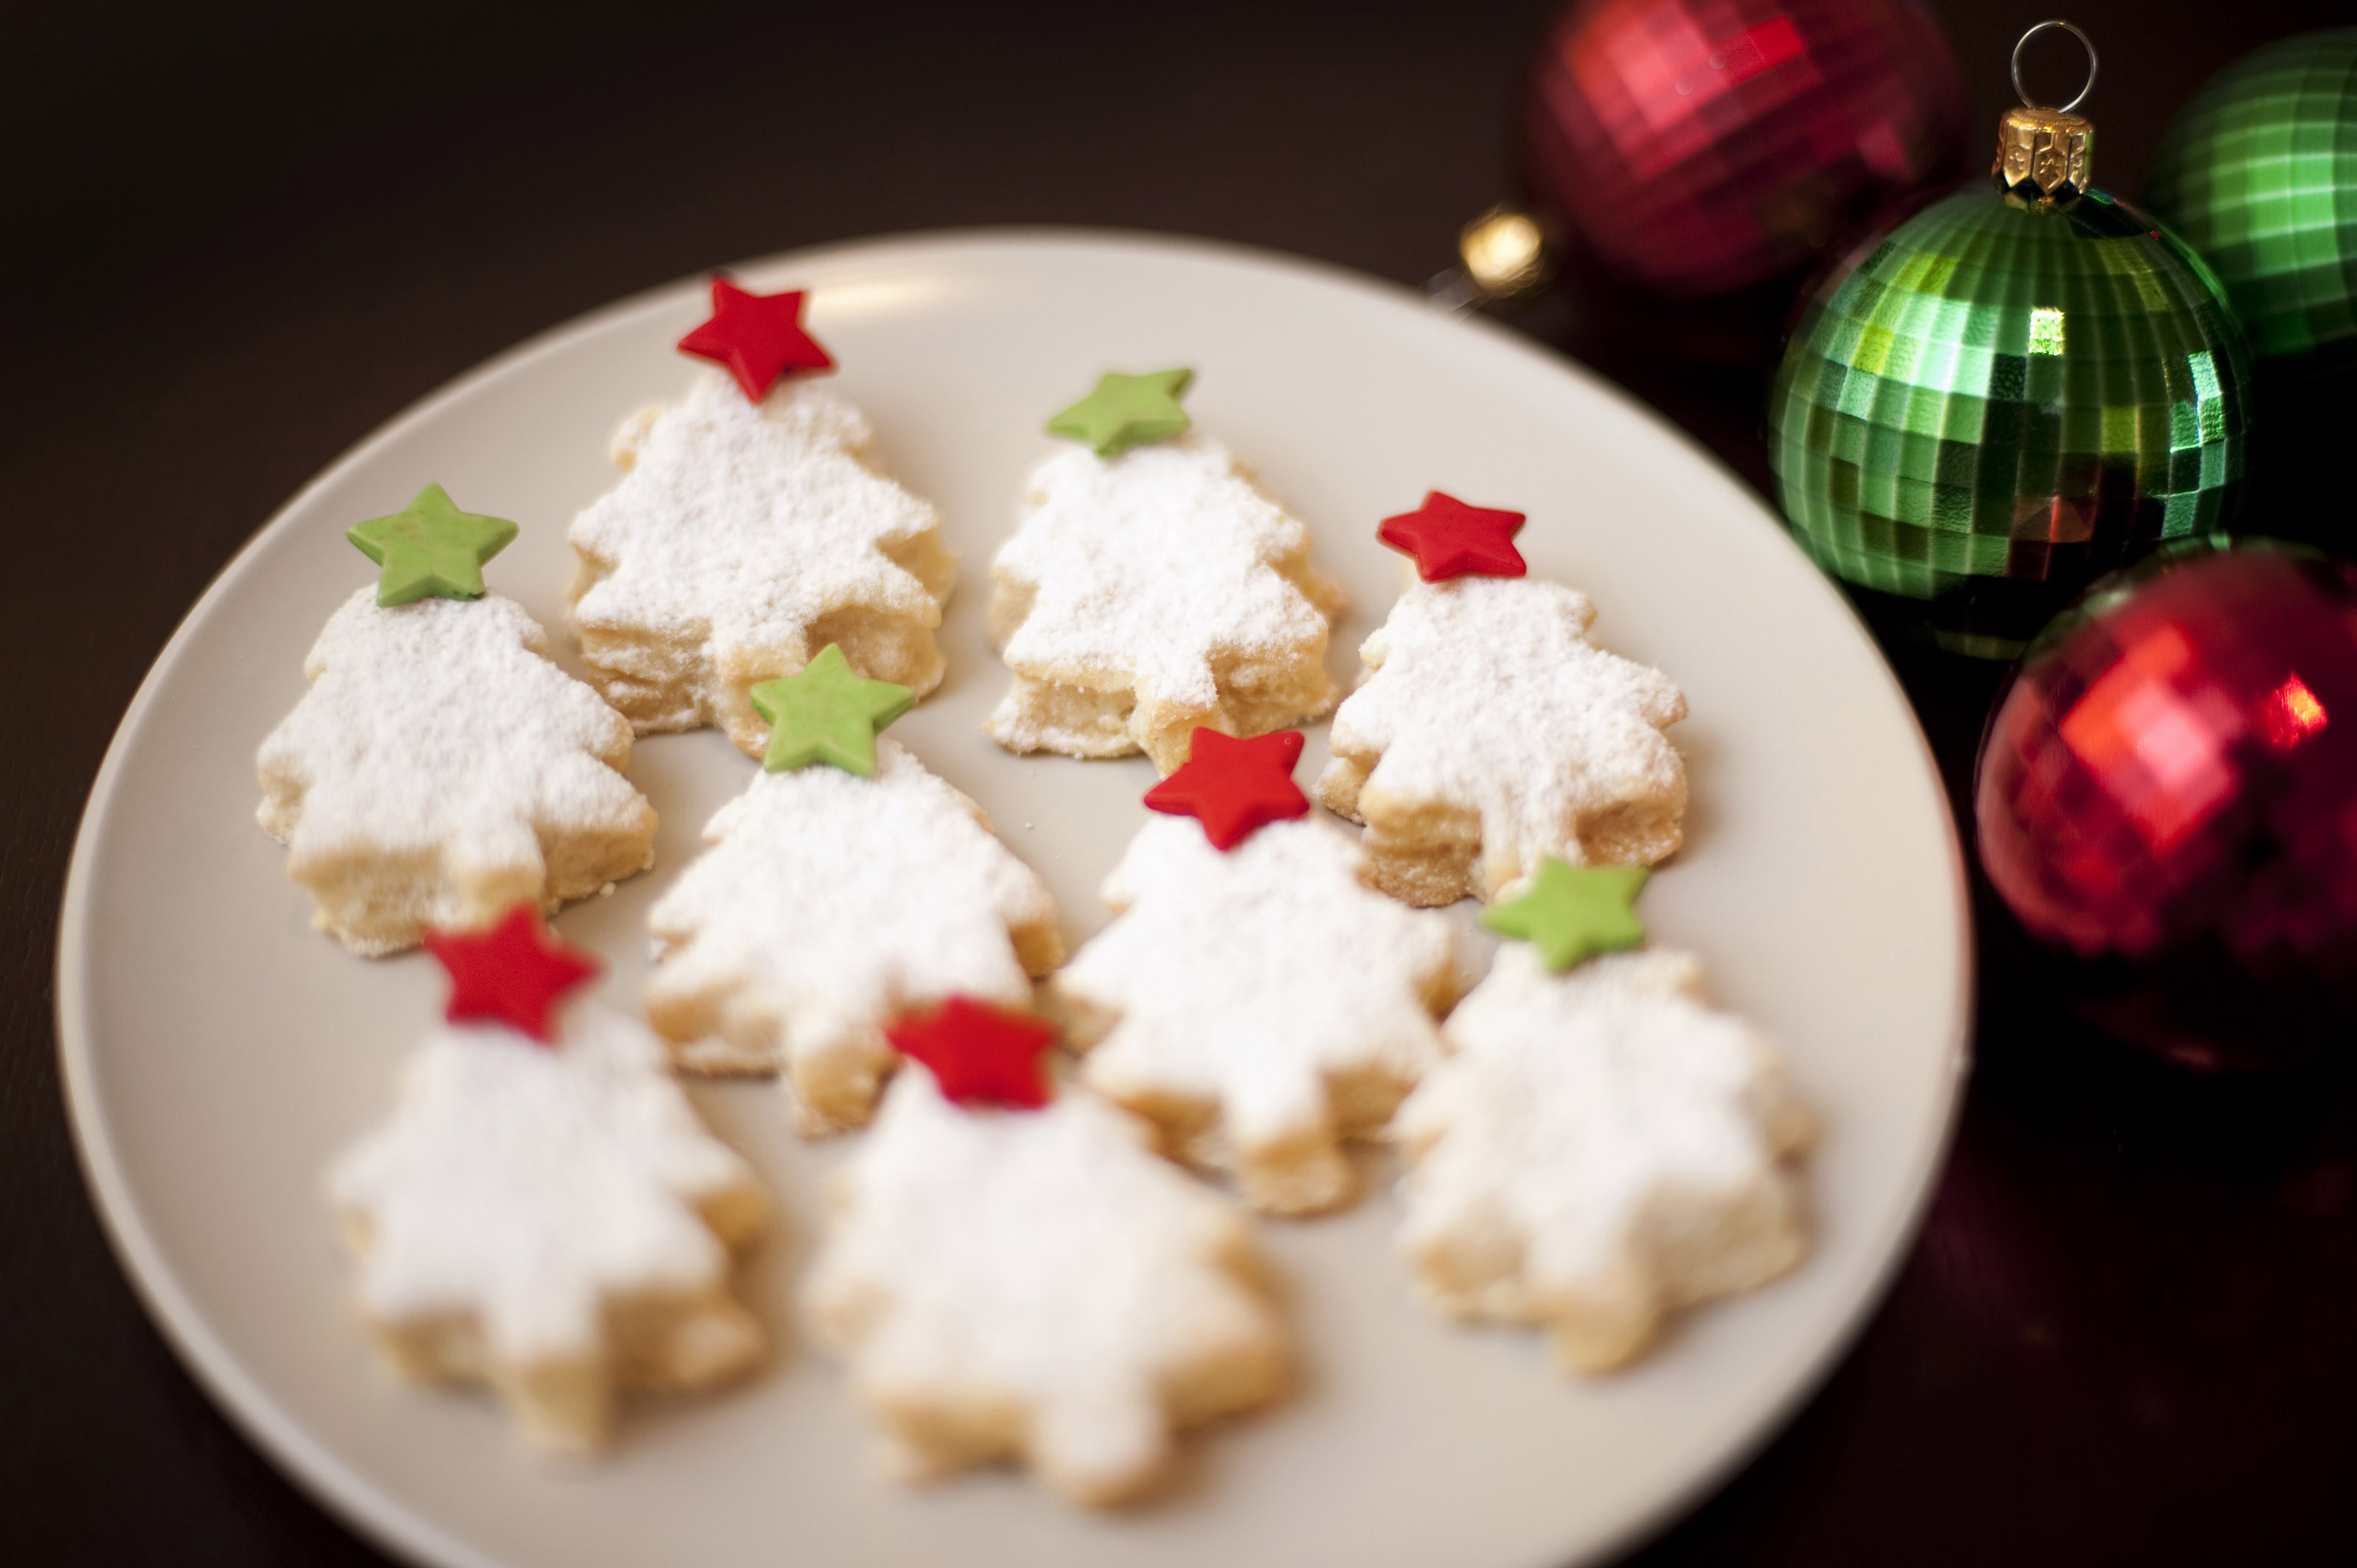 Plate Of Christmas Cookies
 Plate of decorative Christmas cookies 8090